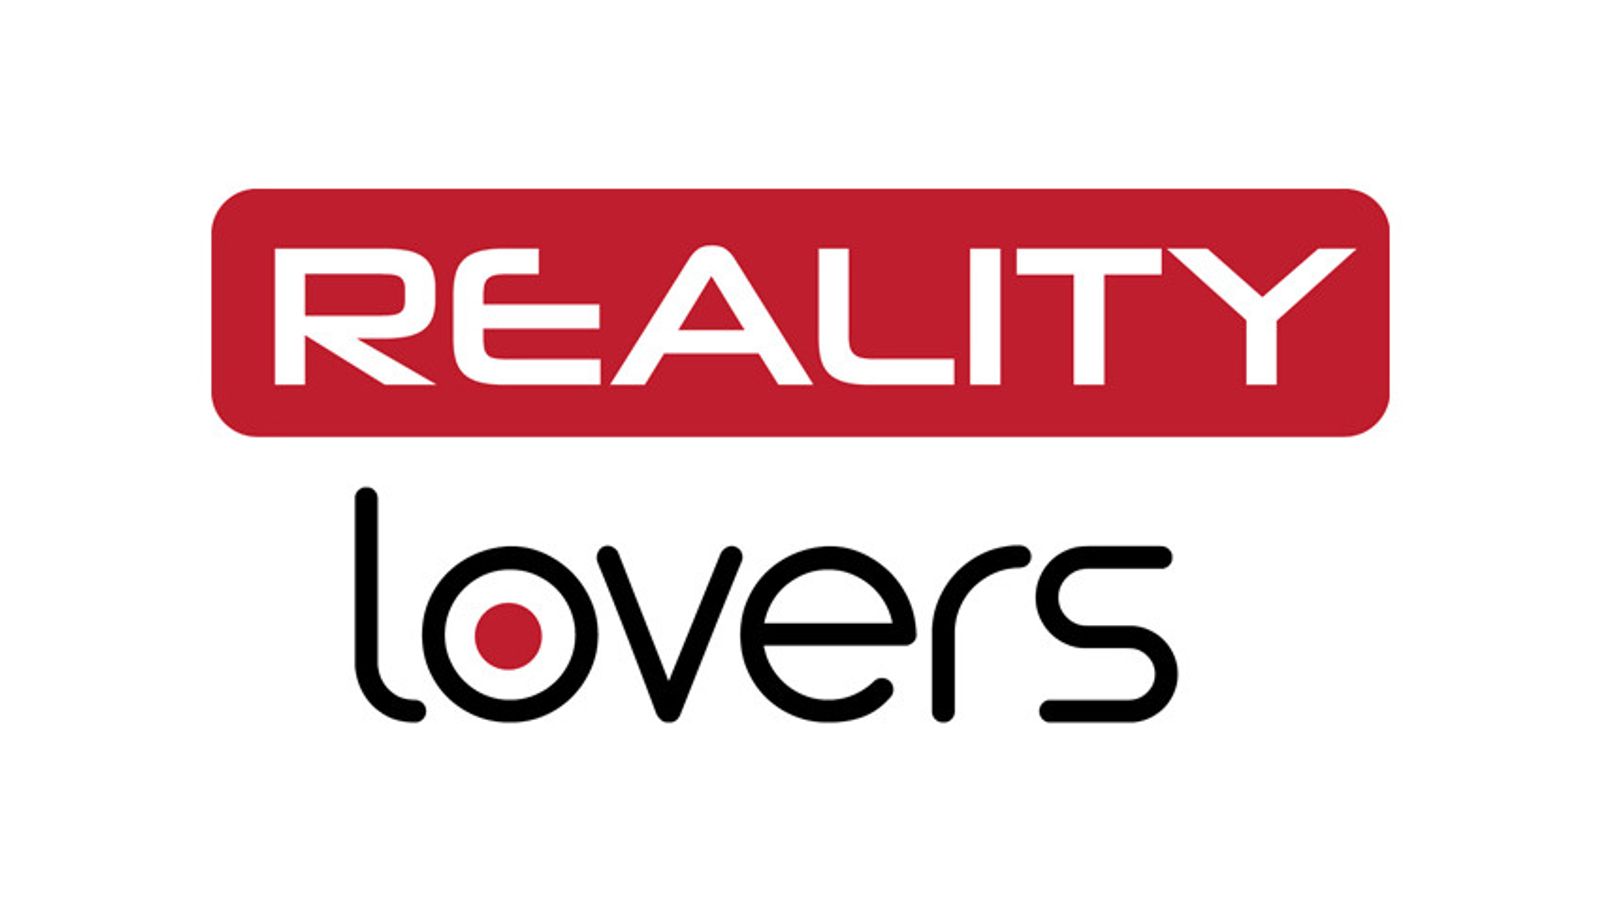 Reality Lovers Announces Full Compatibility With All VR Devices